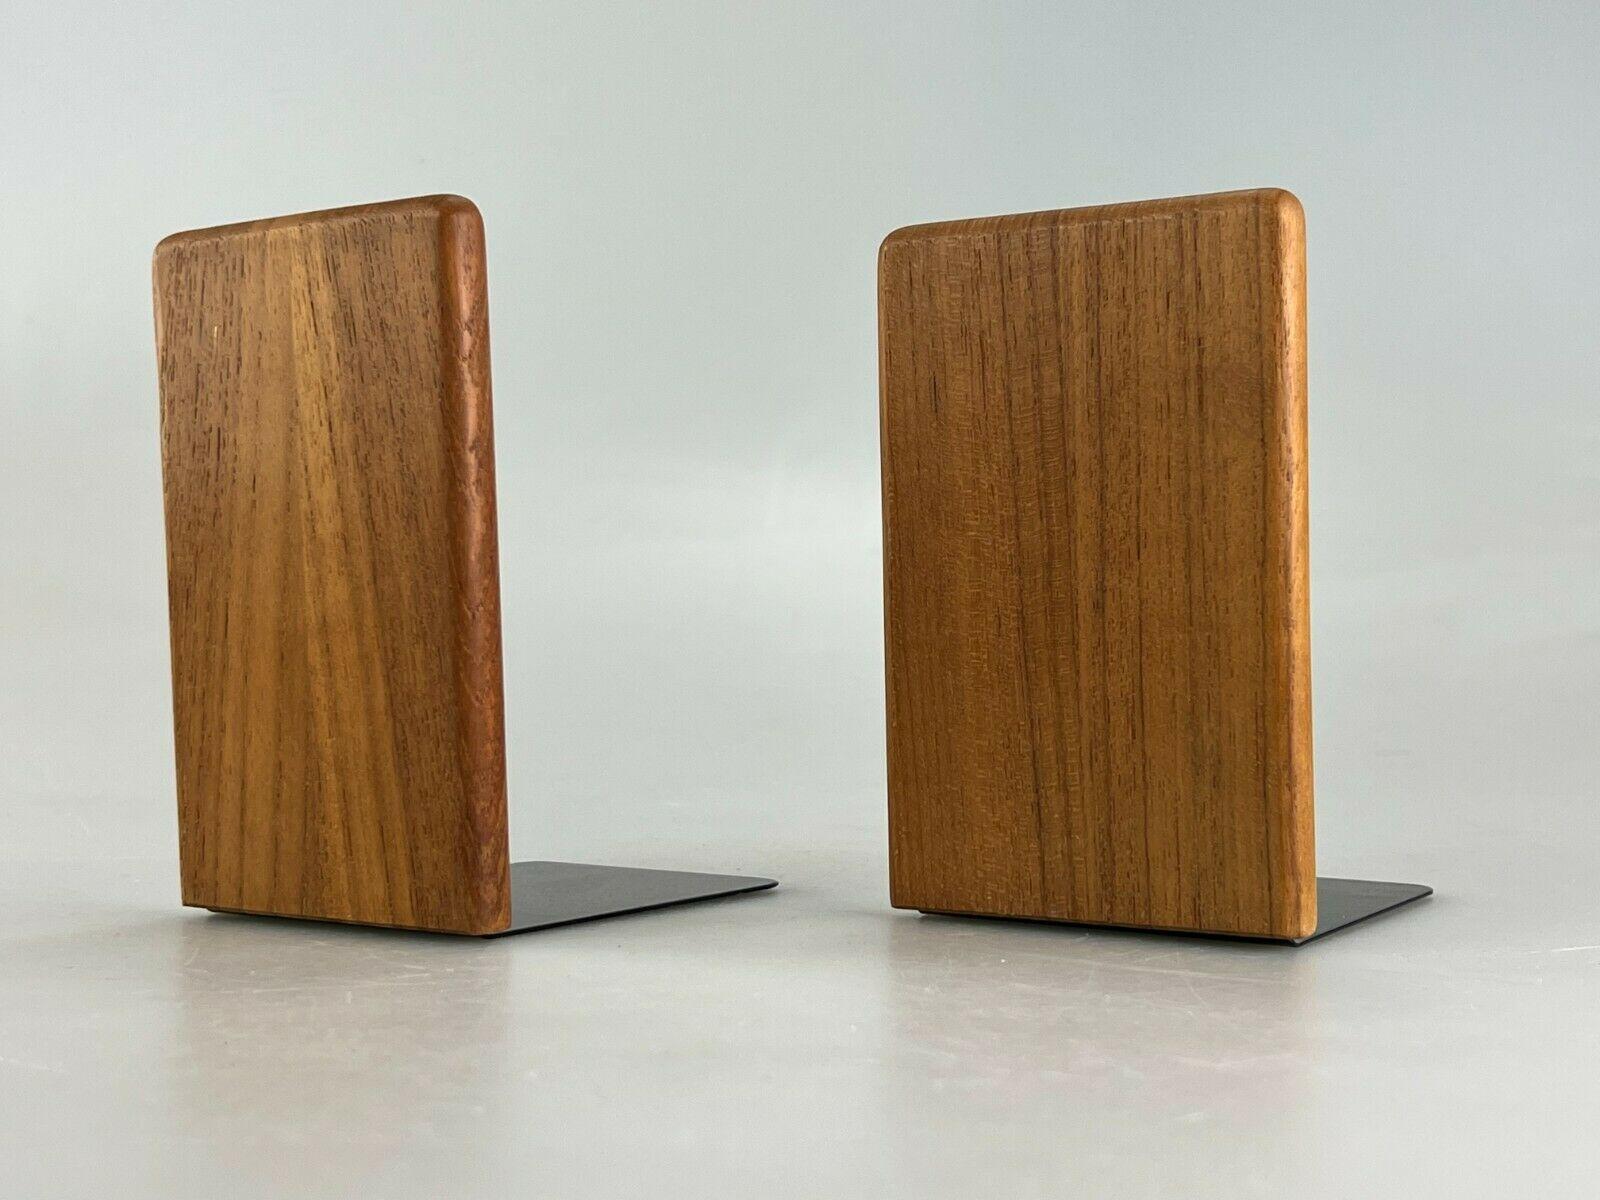 60s 70s teak bookends Buchhalter Danish Modern Design

Object: 2x bookends

Manufacturer: 

Condition: good

Age: around 1960-1970

Dimensions:

9cm x 14.5cm x 11cm

Other notes:

The pictures serve as part of the